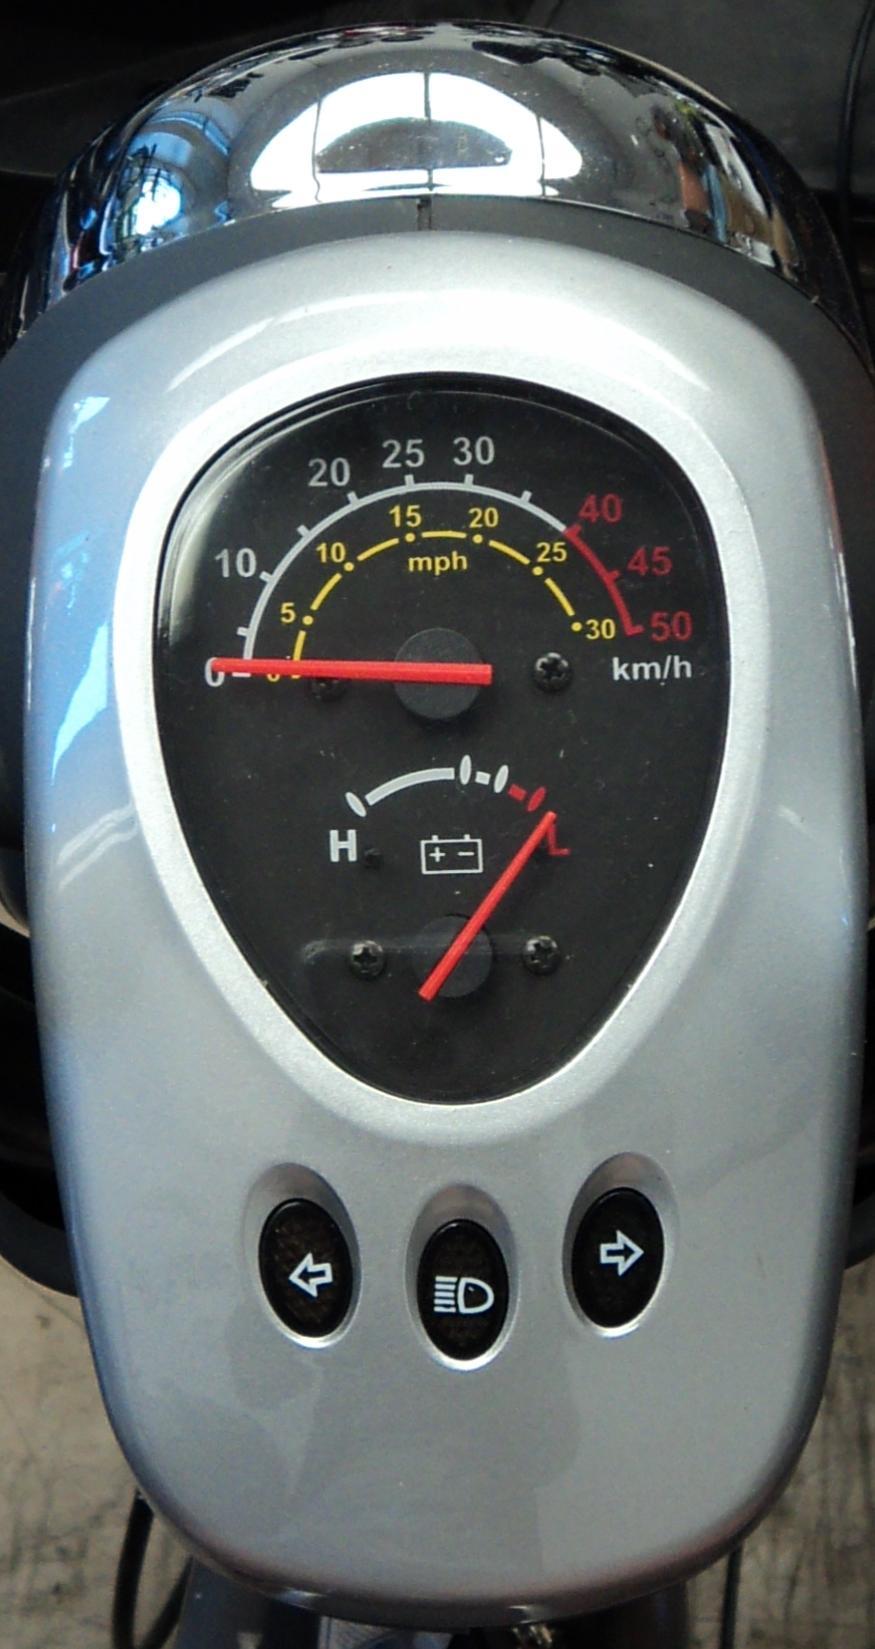 18 P a g e Speedometer This shows the speed you are going at once the bike is running. Power Gauge This meter demonstrates the remaining amount of electricity available in your battery.